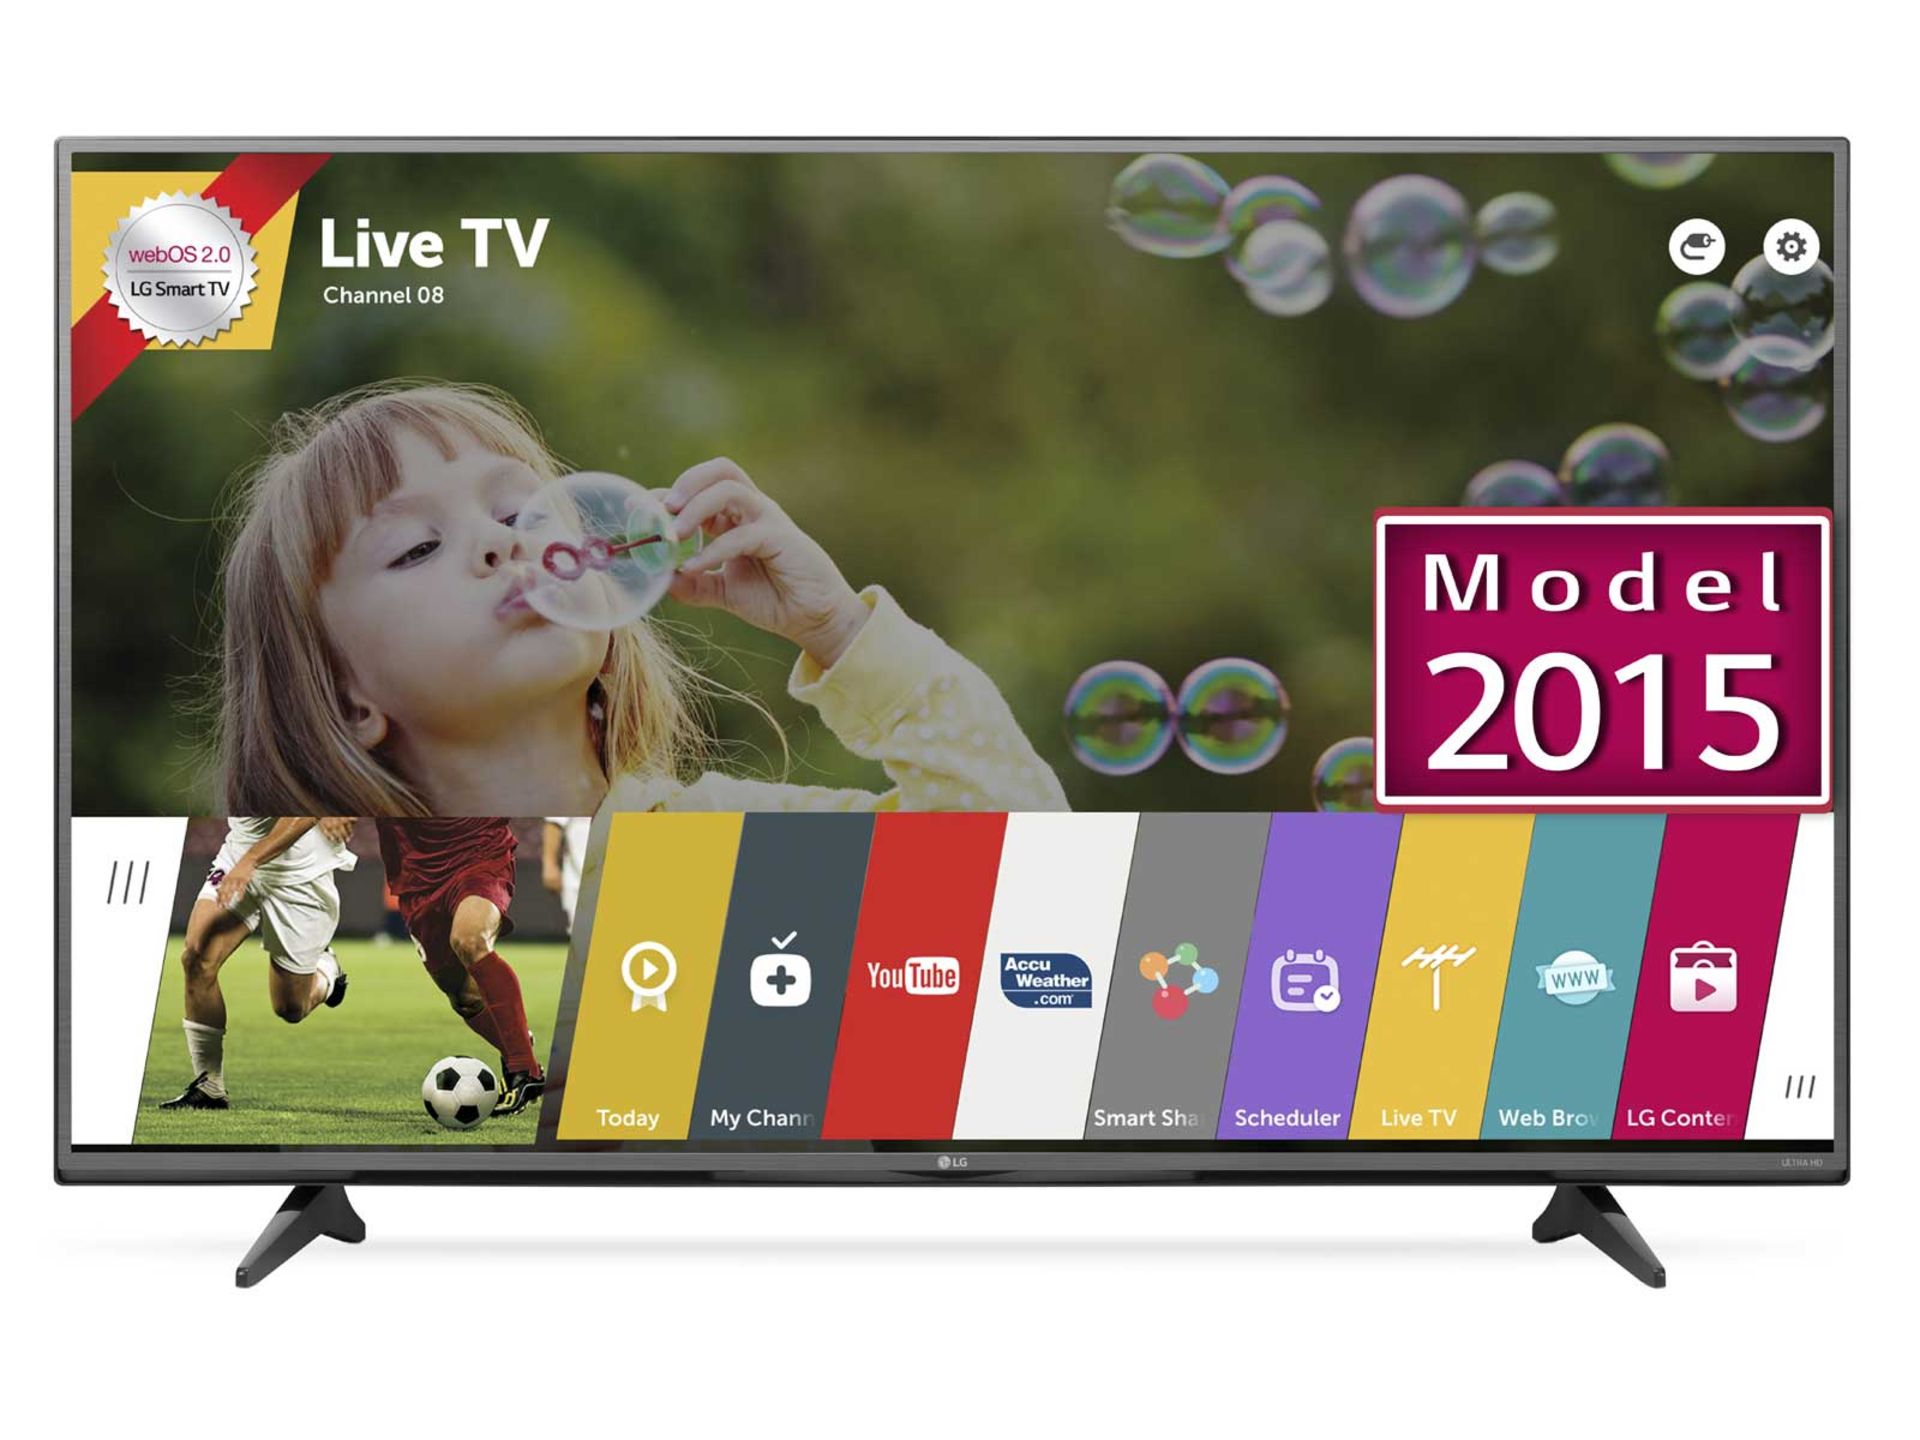 V Grade A 55" 4K ULTRA HD SMART TV WITH WEBOS 2.0 & FREEVIEW & WIFI 55UF6807 (Item Will Be Available